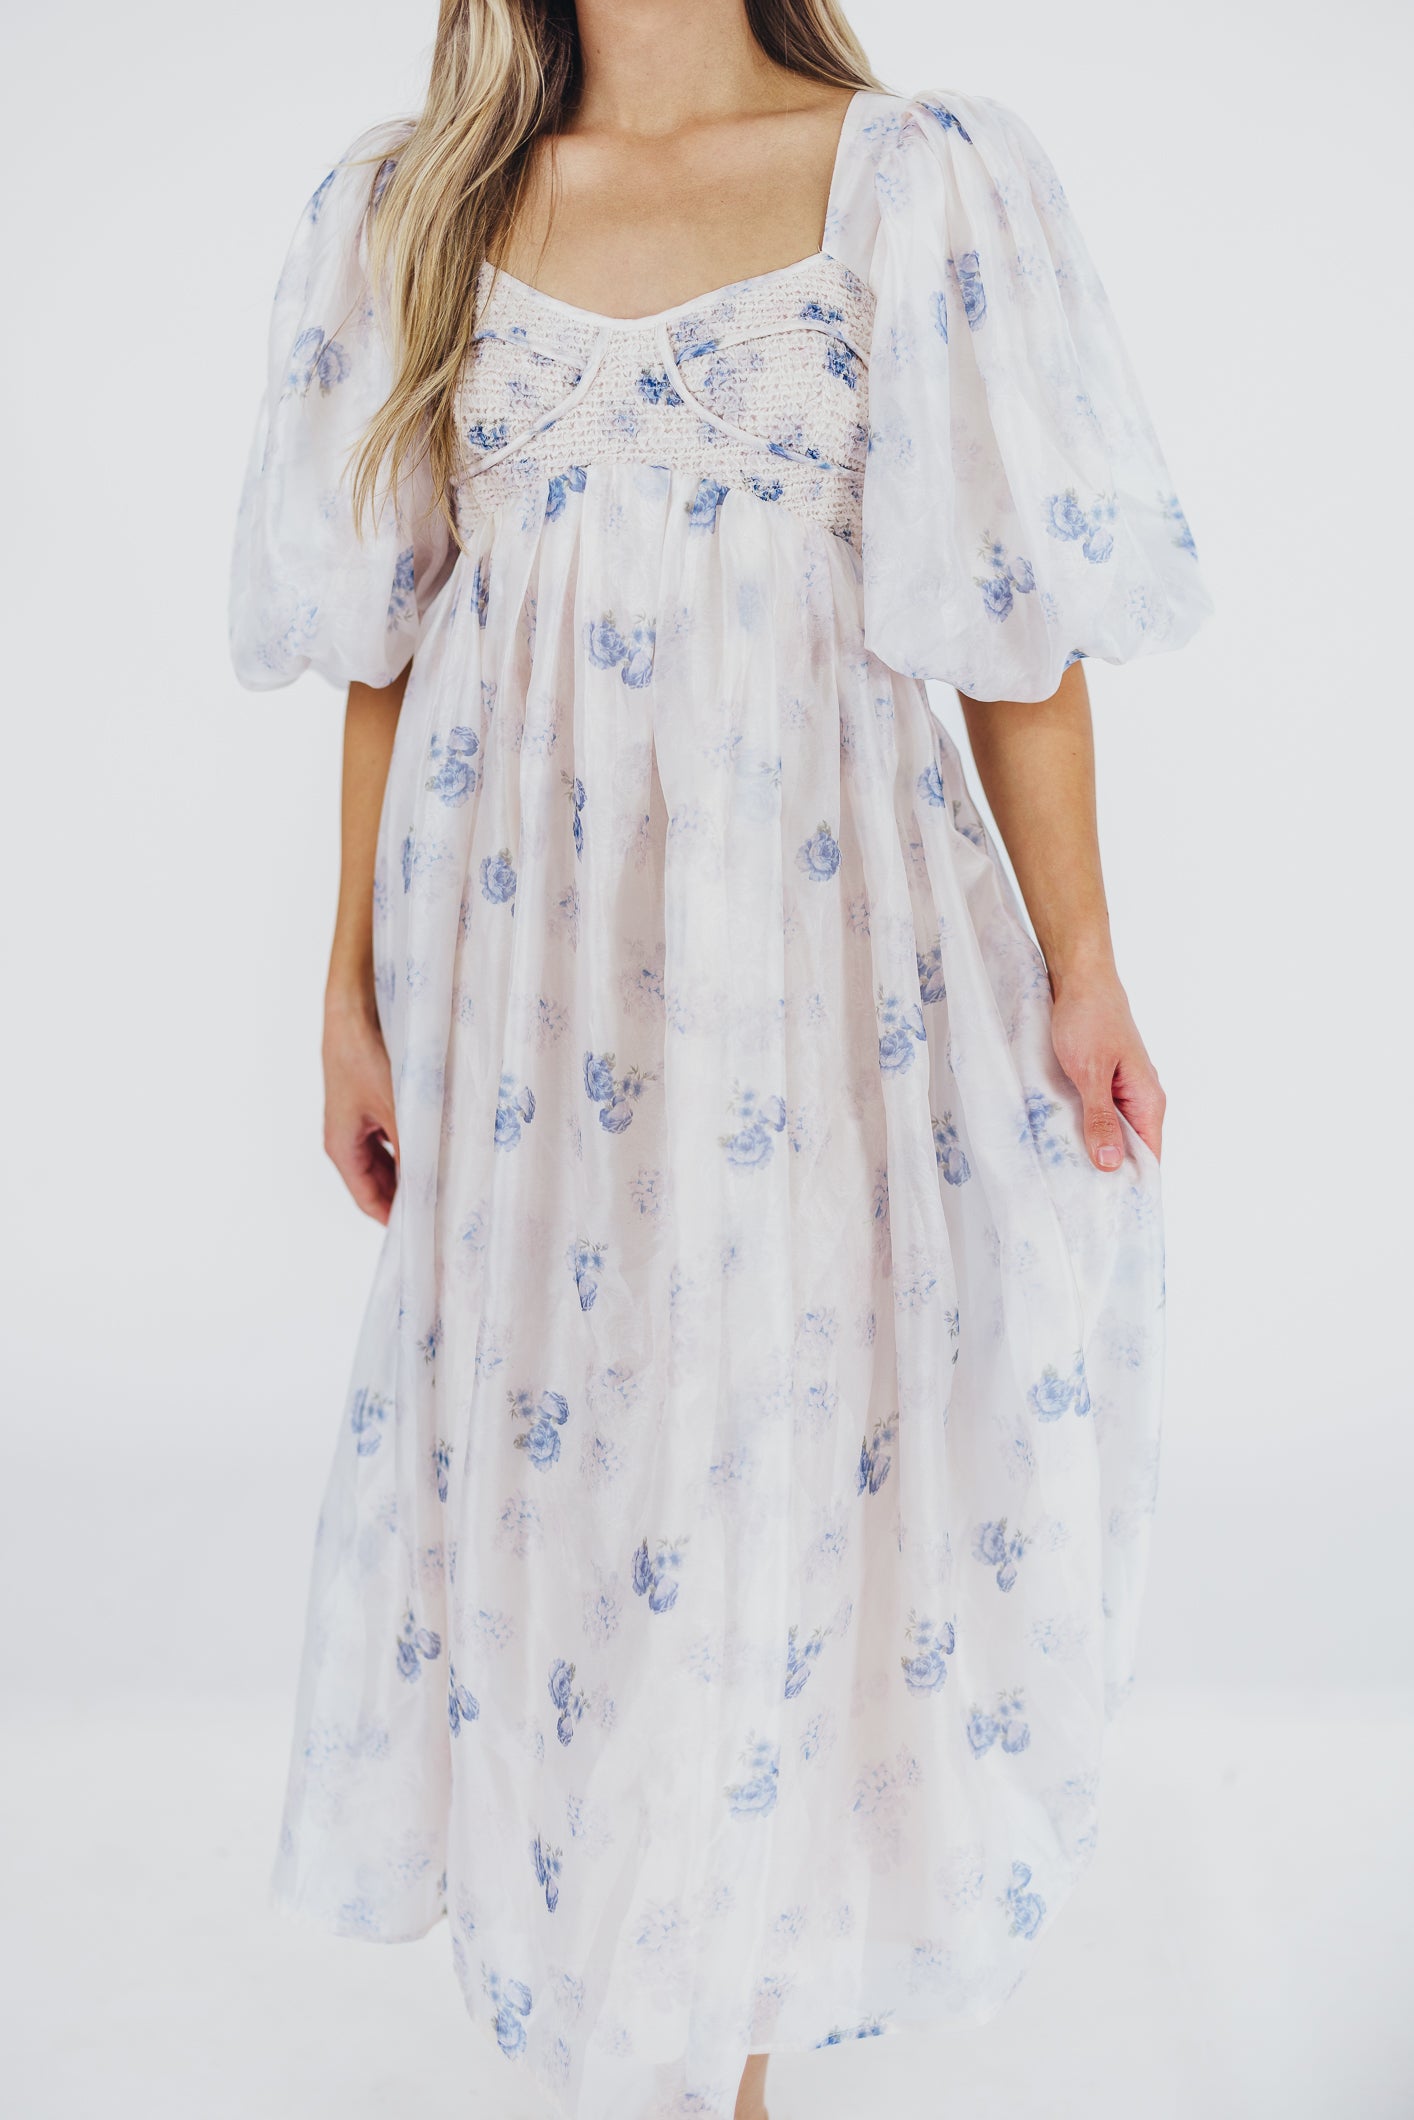 Harlow Maxi Dress in Muted Blue Floral - Bump Friendly & Inclusive Sizing (S-3XL)